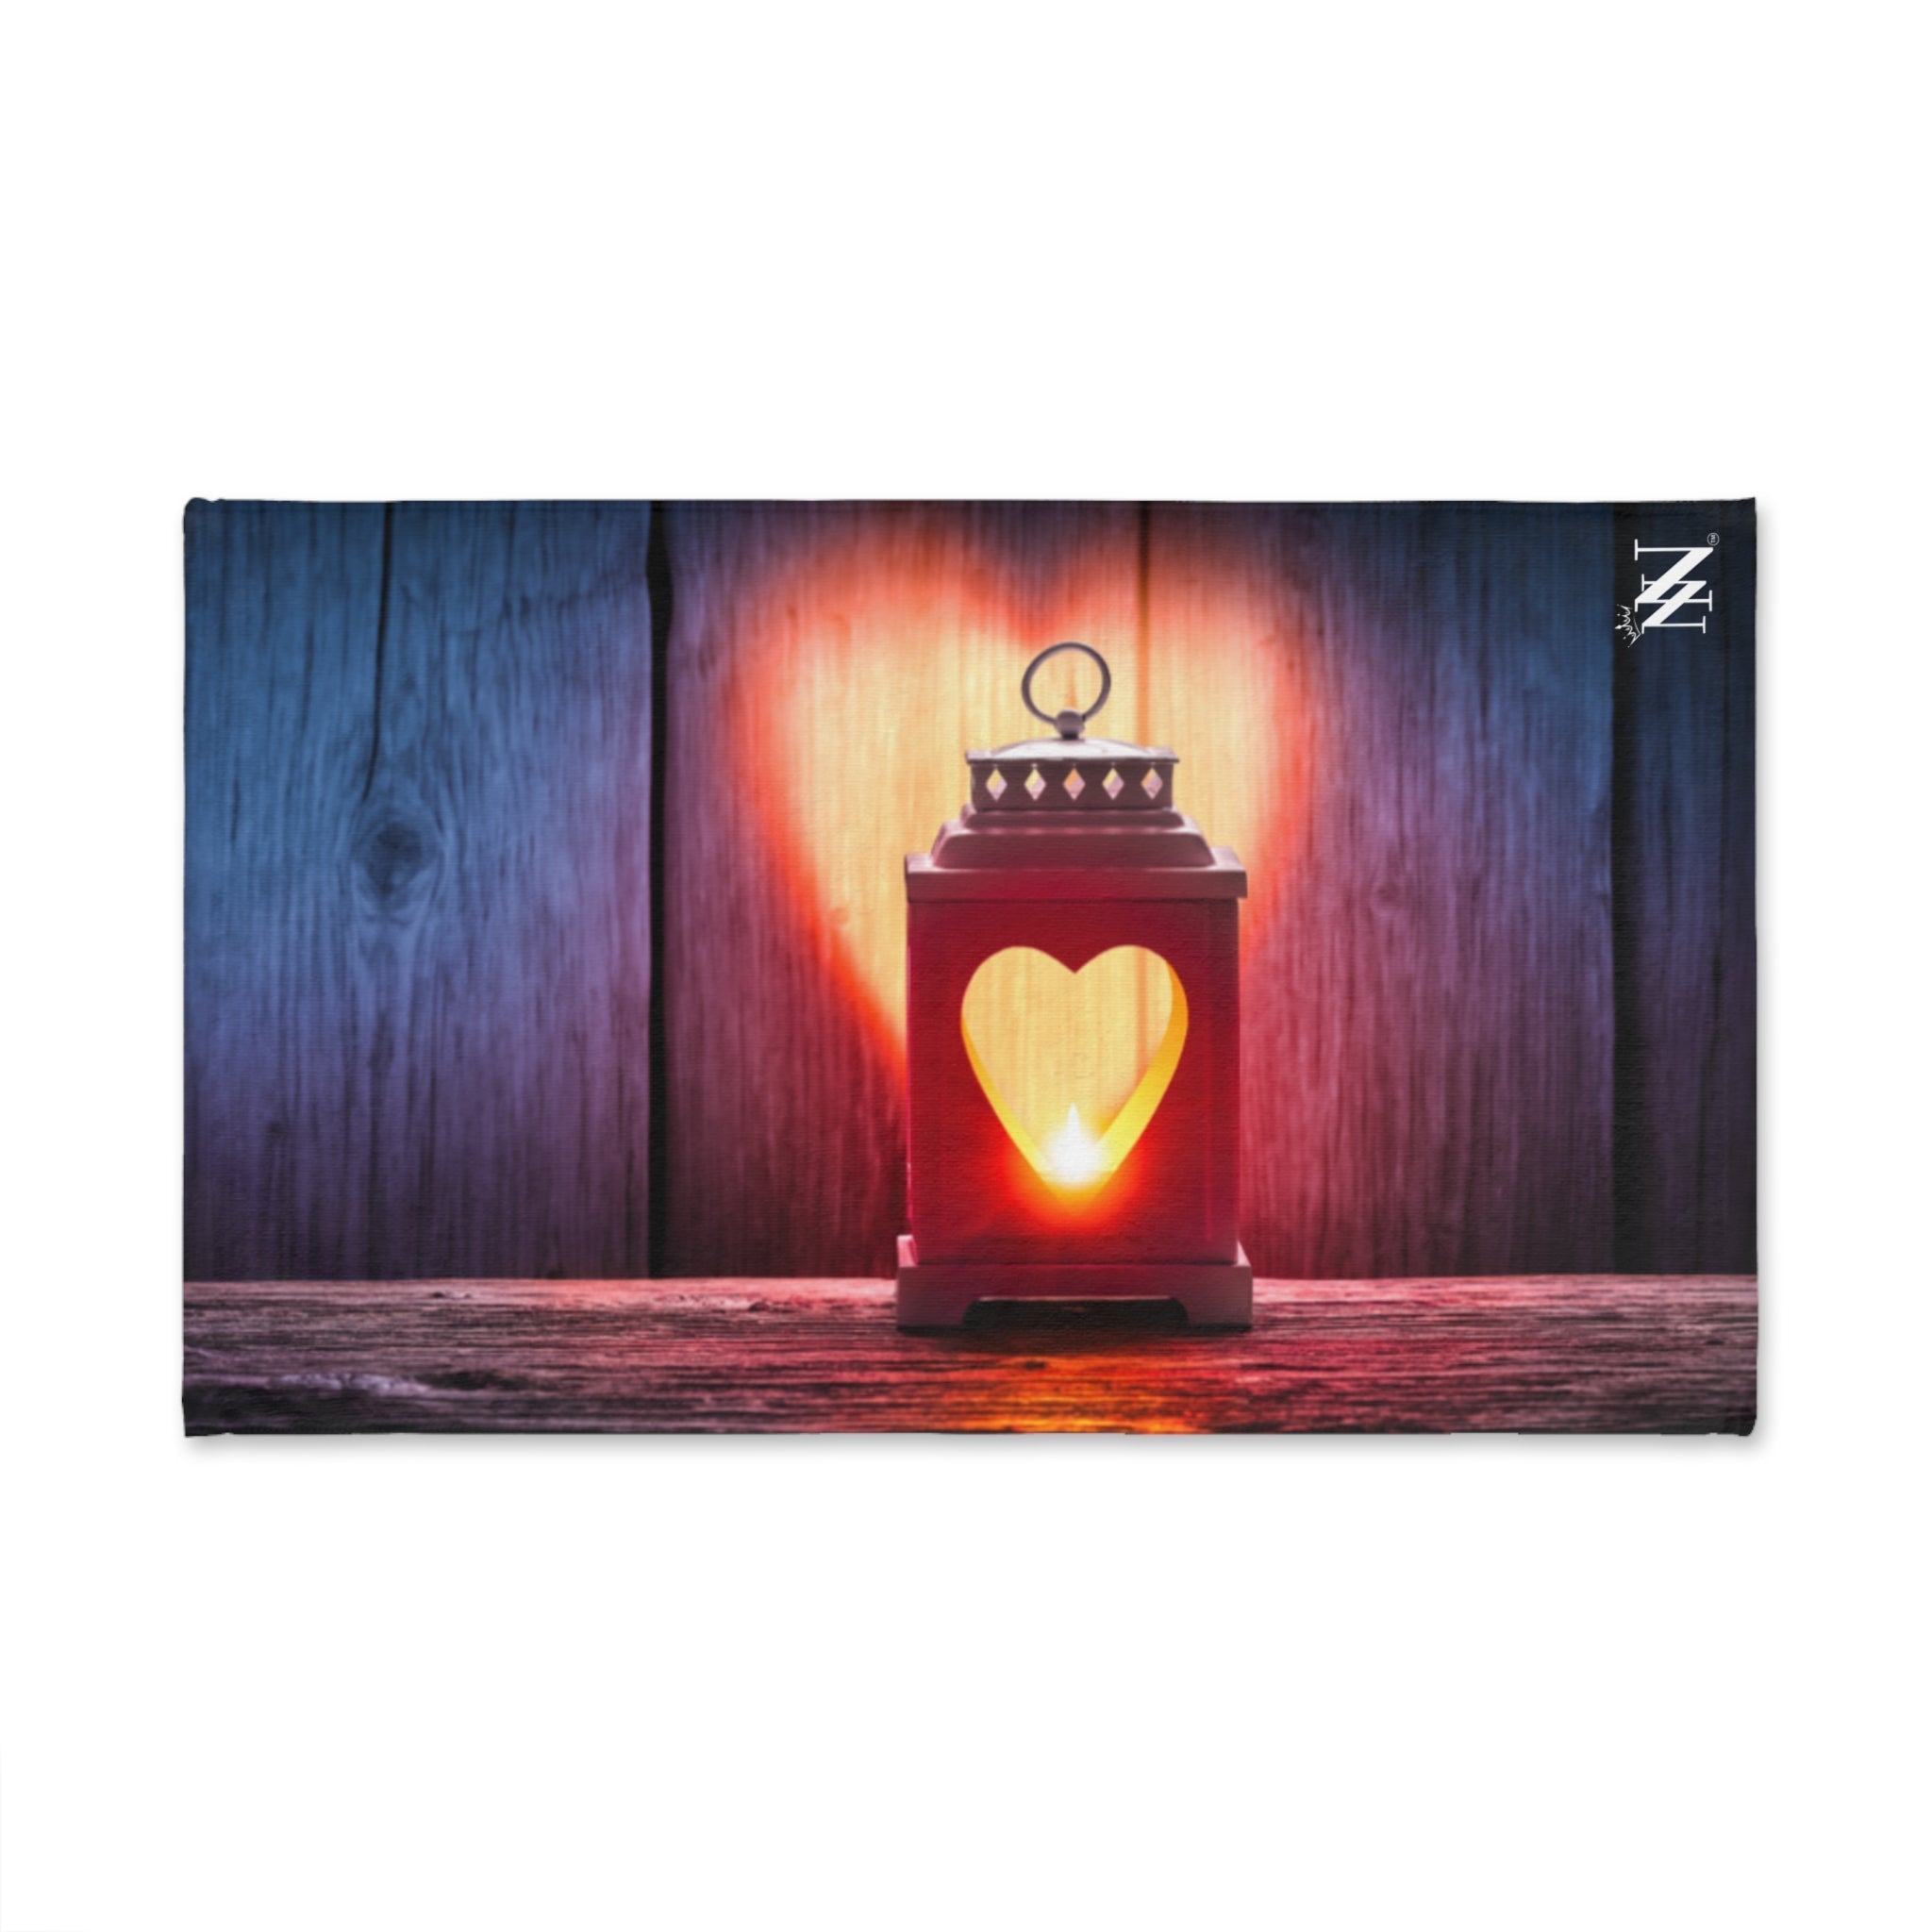 Heart Lantern White | Funny Gifts for Men - Gifts for Him - Birthday Gifts for Men, Him, Her, Husband, Boyfriend, Girlfriend, New Couple Gifts, Fathers & Valentines Day Gifts, Christmas Gifts NECTAR NAPKINS